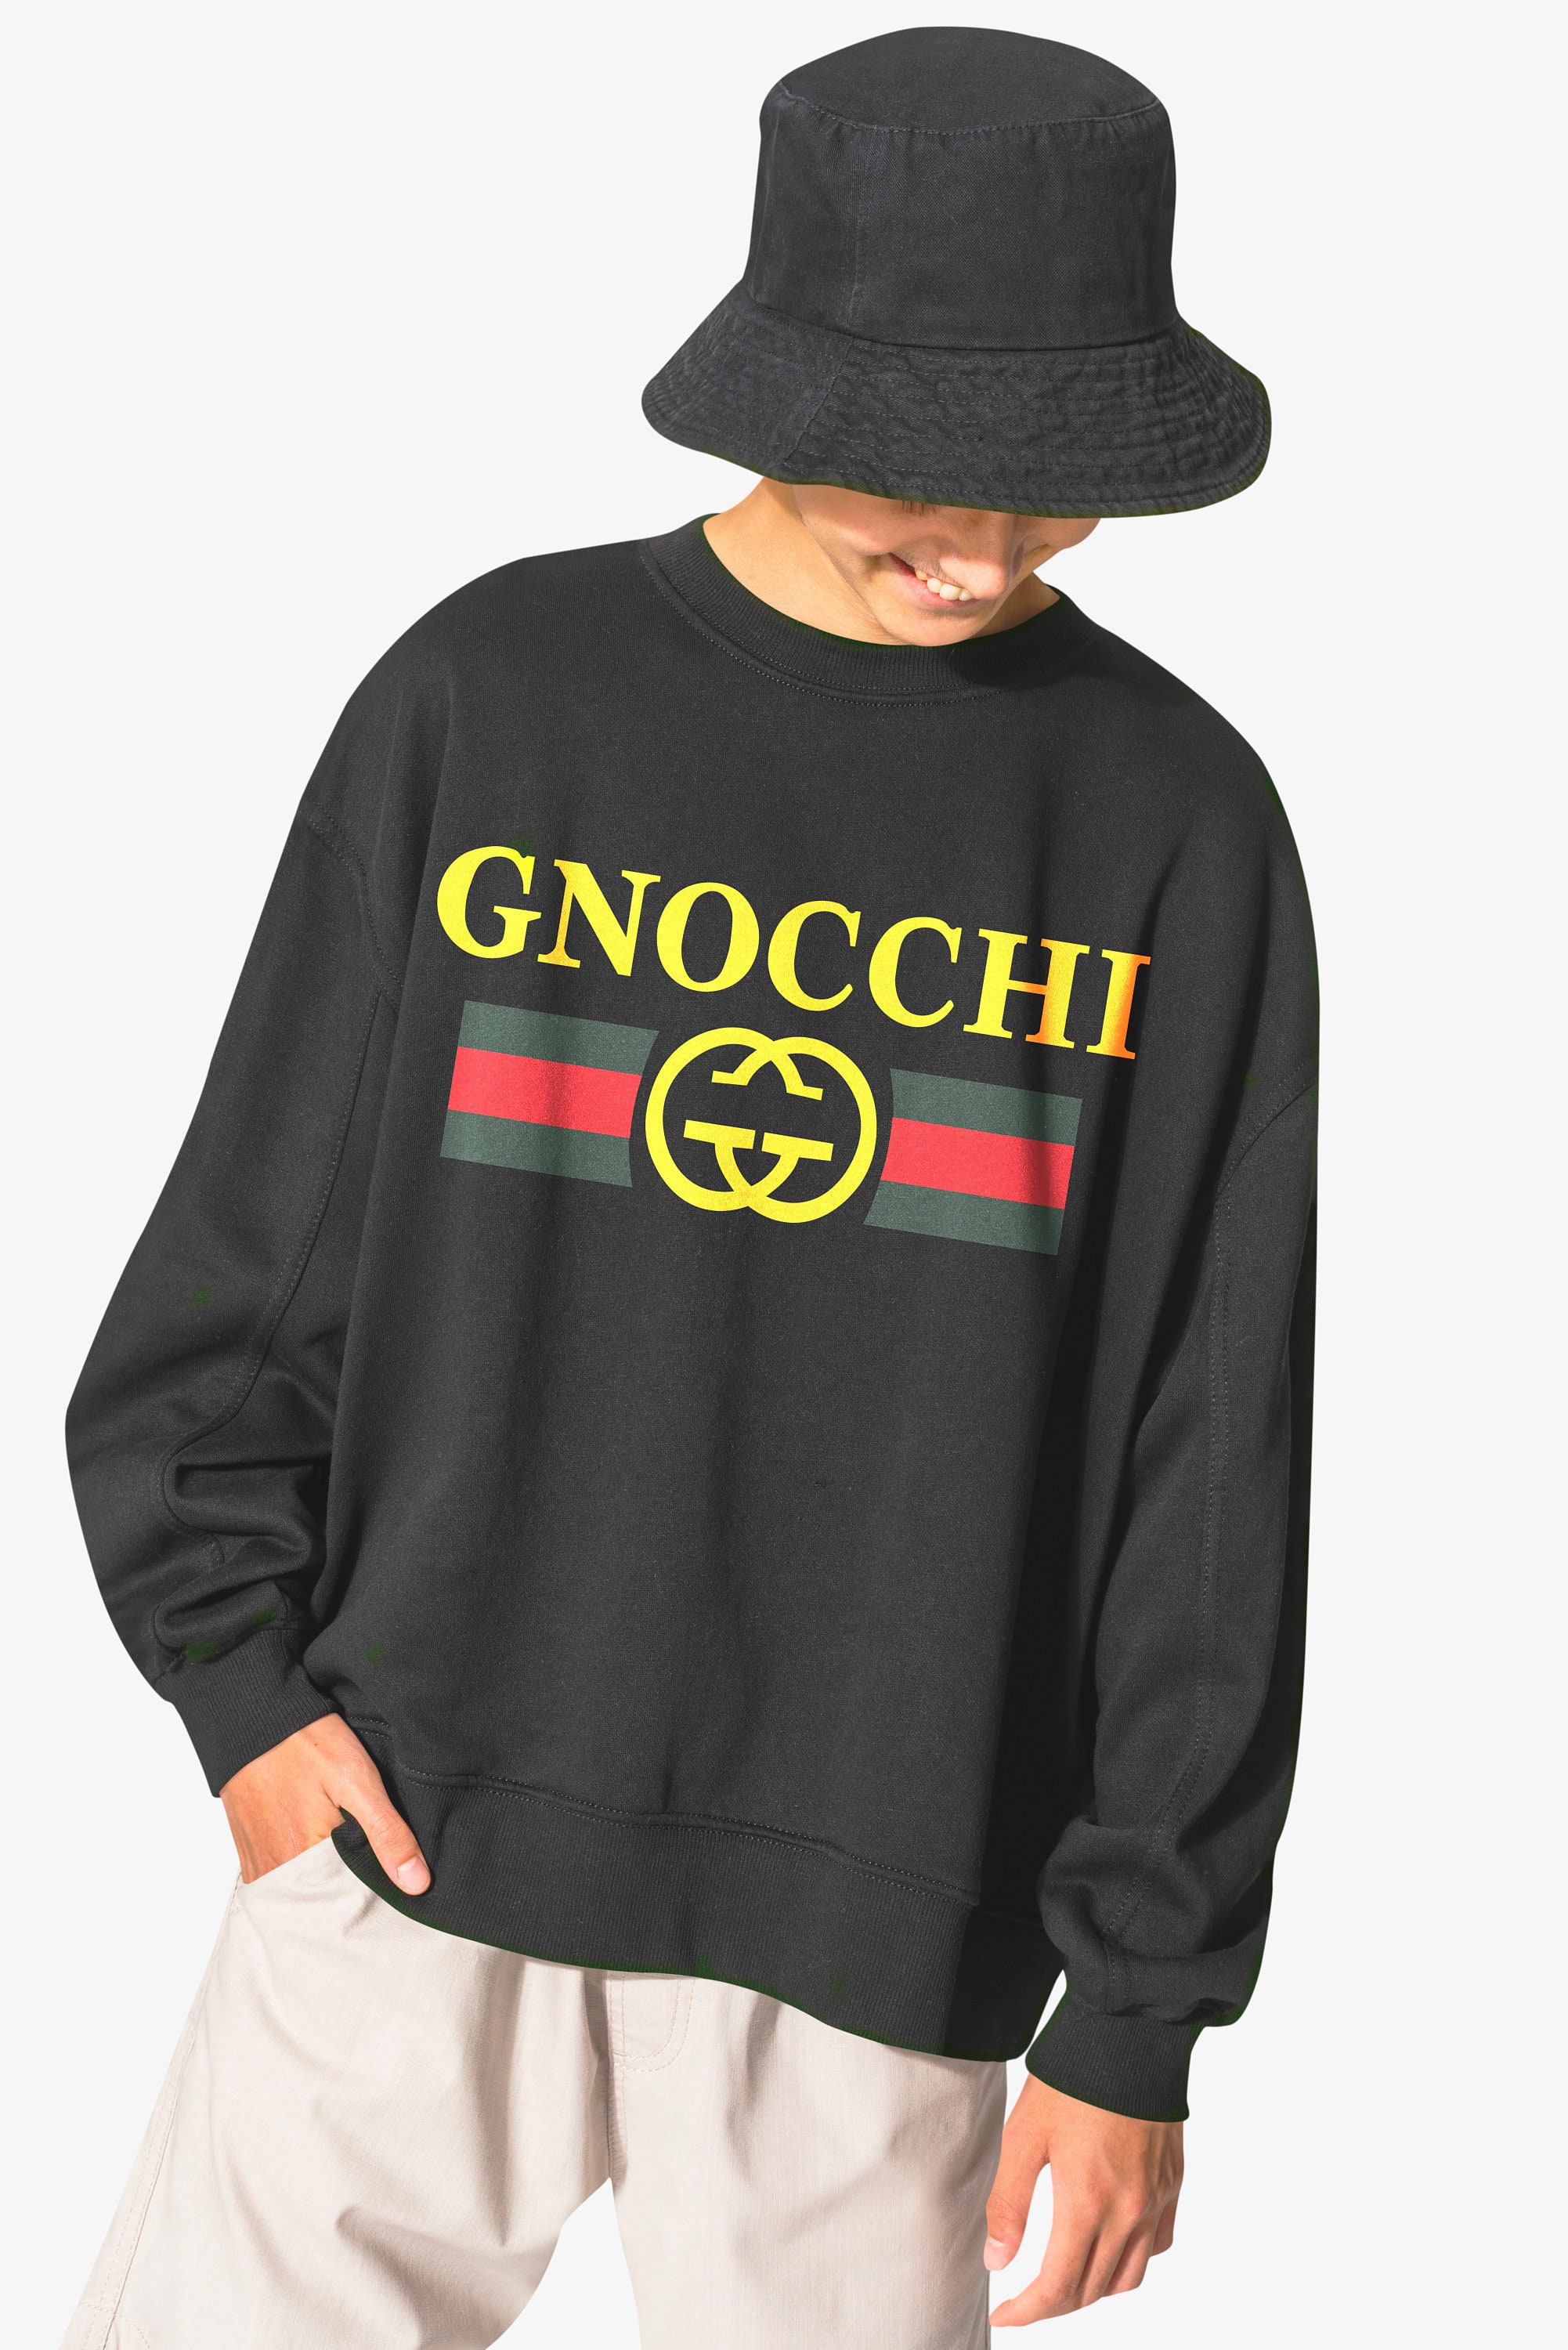 Gucci Black Unisex Hoodie For Men Women Luxury Brand Clothing Clothes Outfit